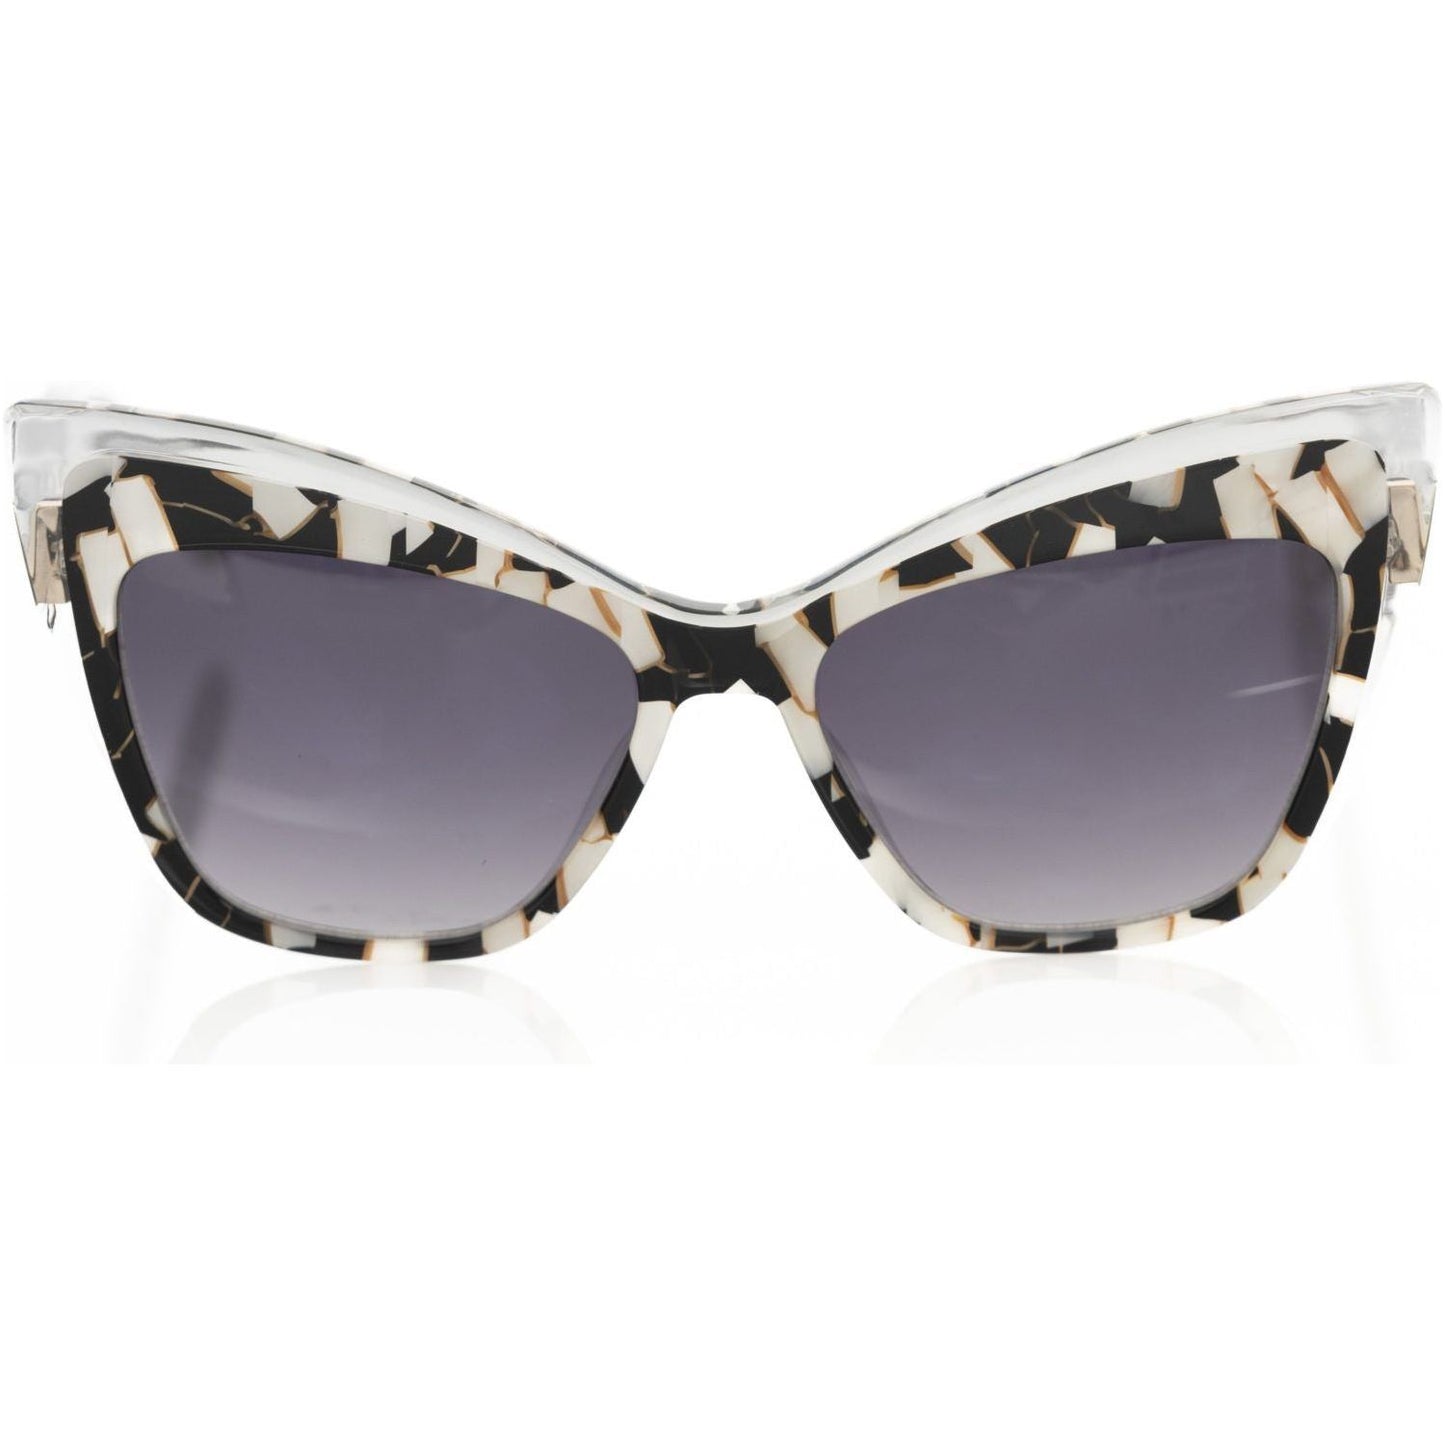 Frankie Morello Chic Cat Eye Sunglasses with Pearly Accent multicolor-acetate-sunglasses